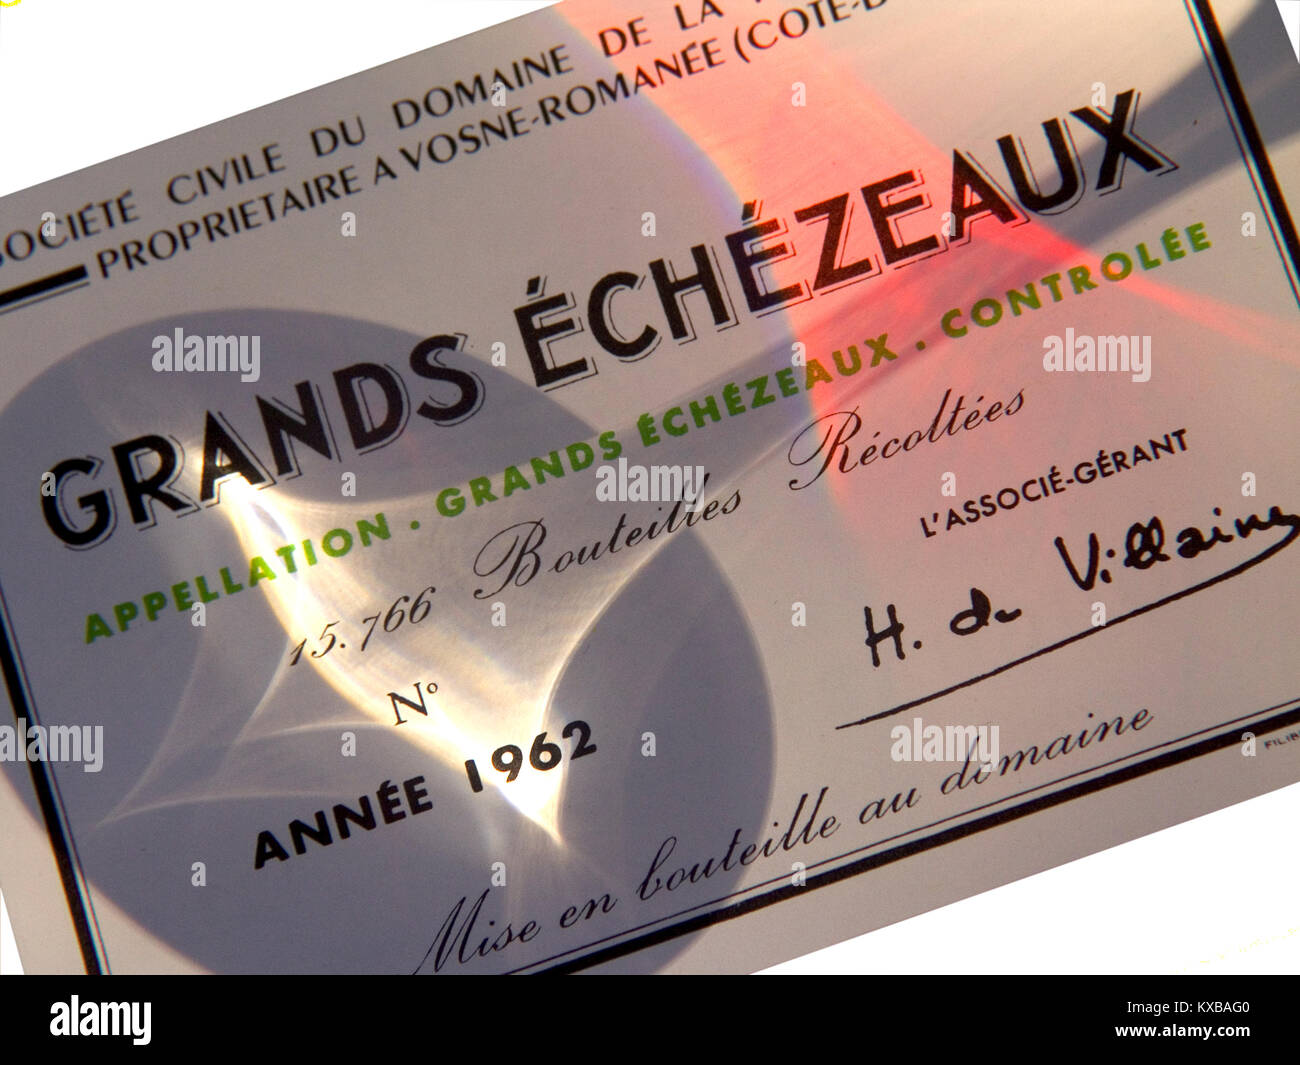 Grands Échezeaux wine bottle label with shadow of wine tasting glass Appellation d'origine contrôlée and Grand Cru vineyard for red wine in the Côte de Nuits subregion of Vosne Romanée Burgundy. Pinot noir is the main grape variety Stock Photo